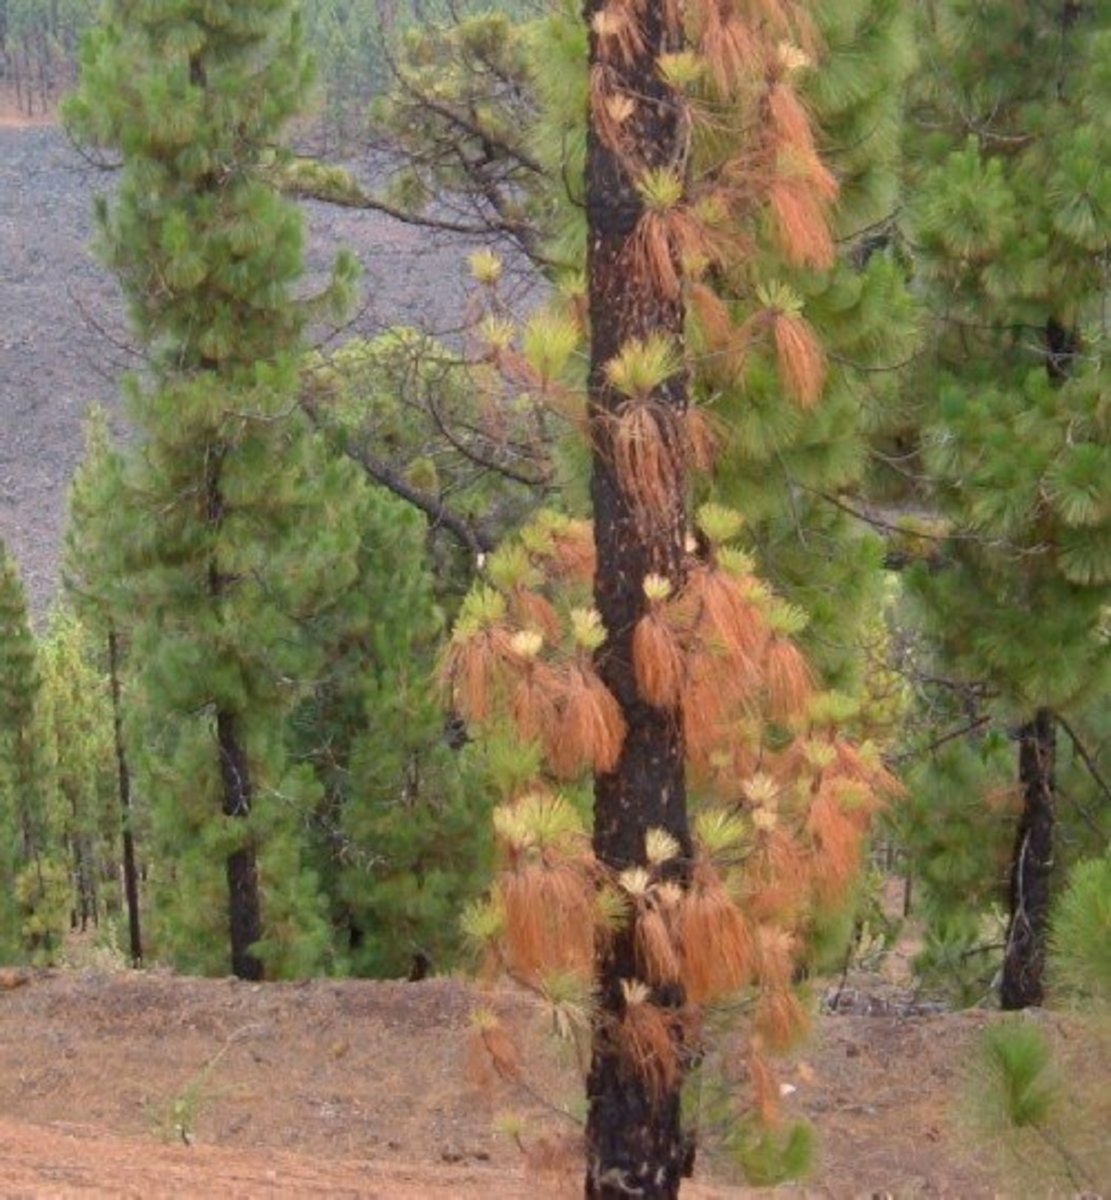 Dying pine tree showing brown dead needles